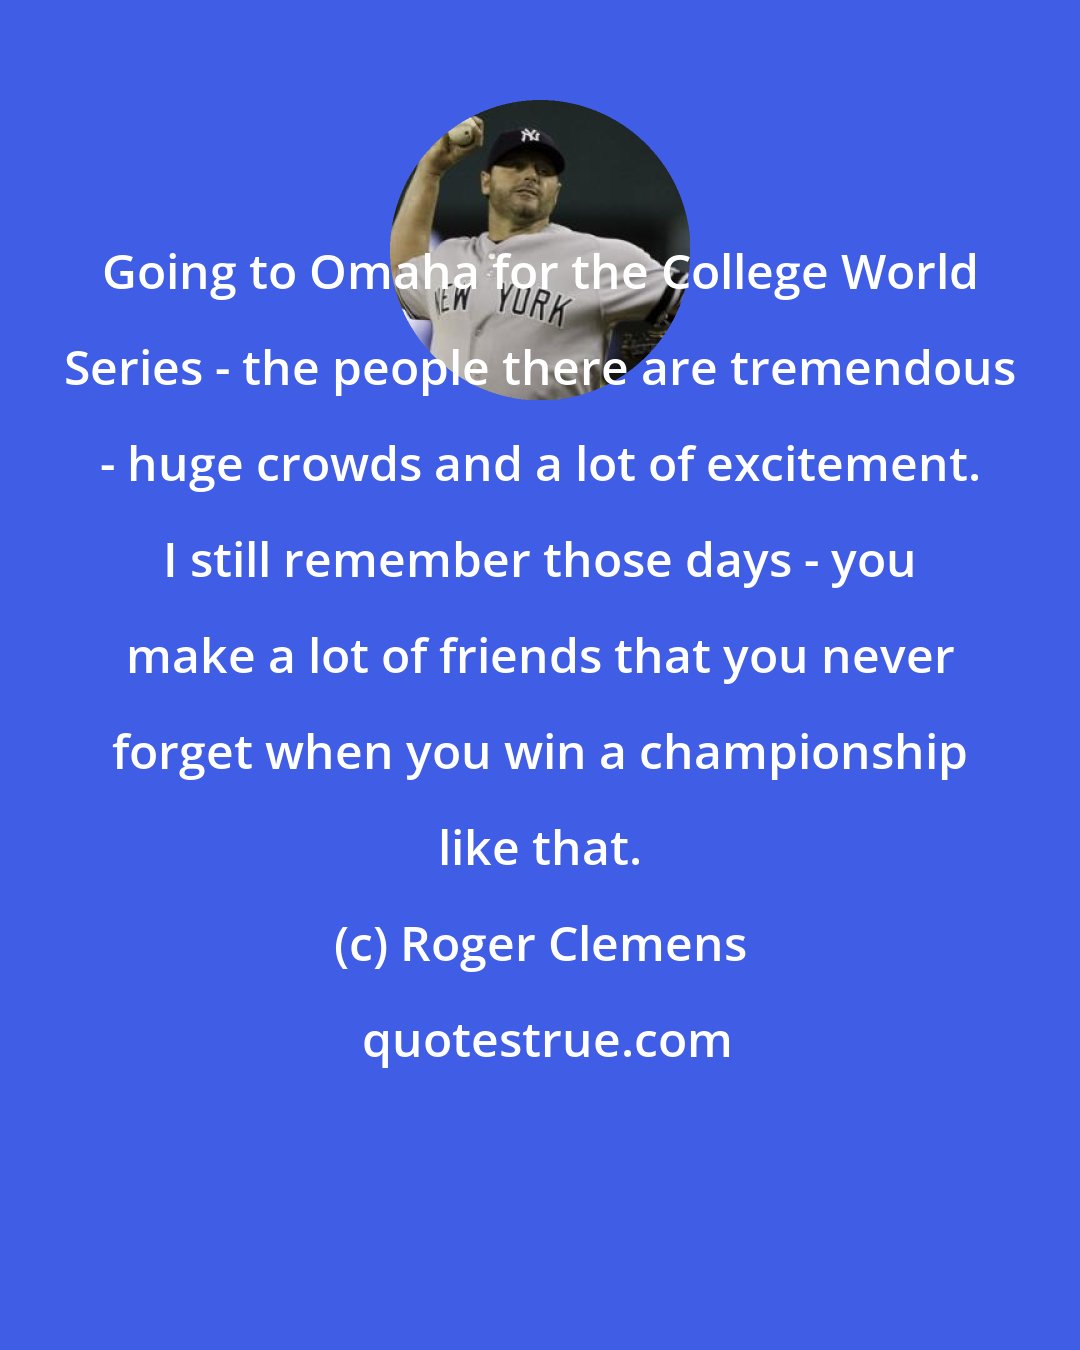 Roger Clemens: Going to Omaha for the College World Series - the people there are tremendous - huge crowds and a lot of excitement. I still remember those days - you make a lot of friends that you never forget when you win a championship like that.